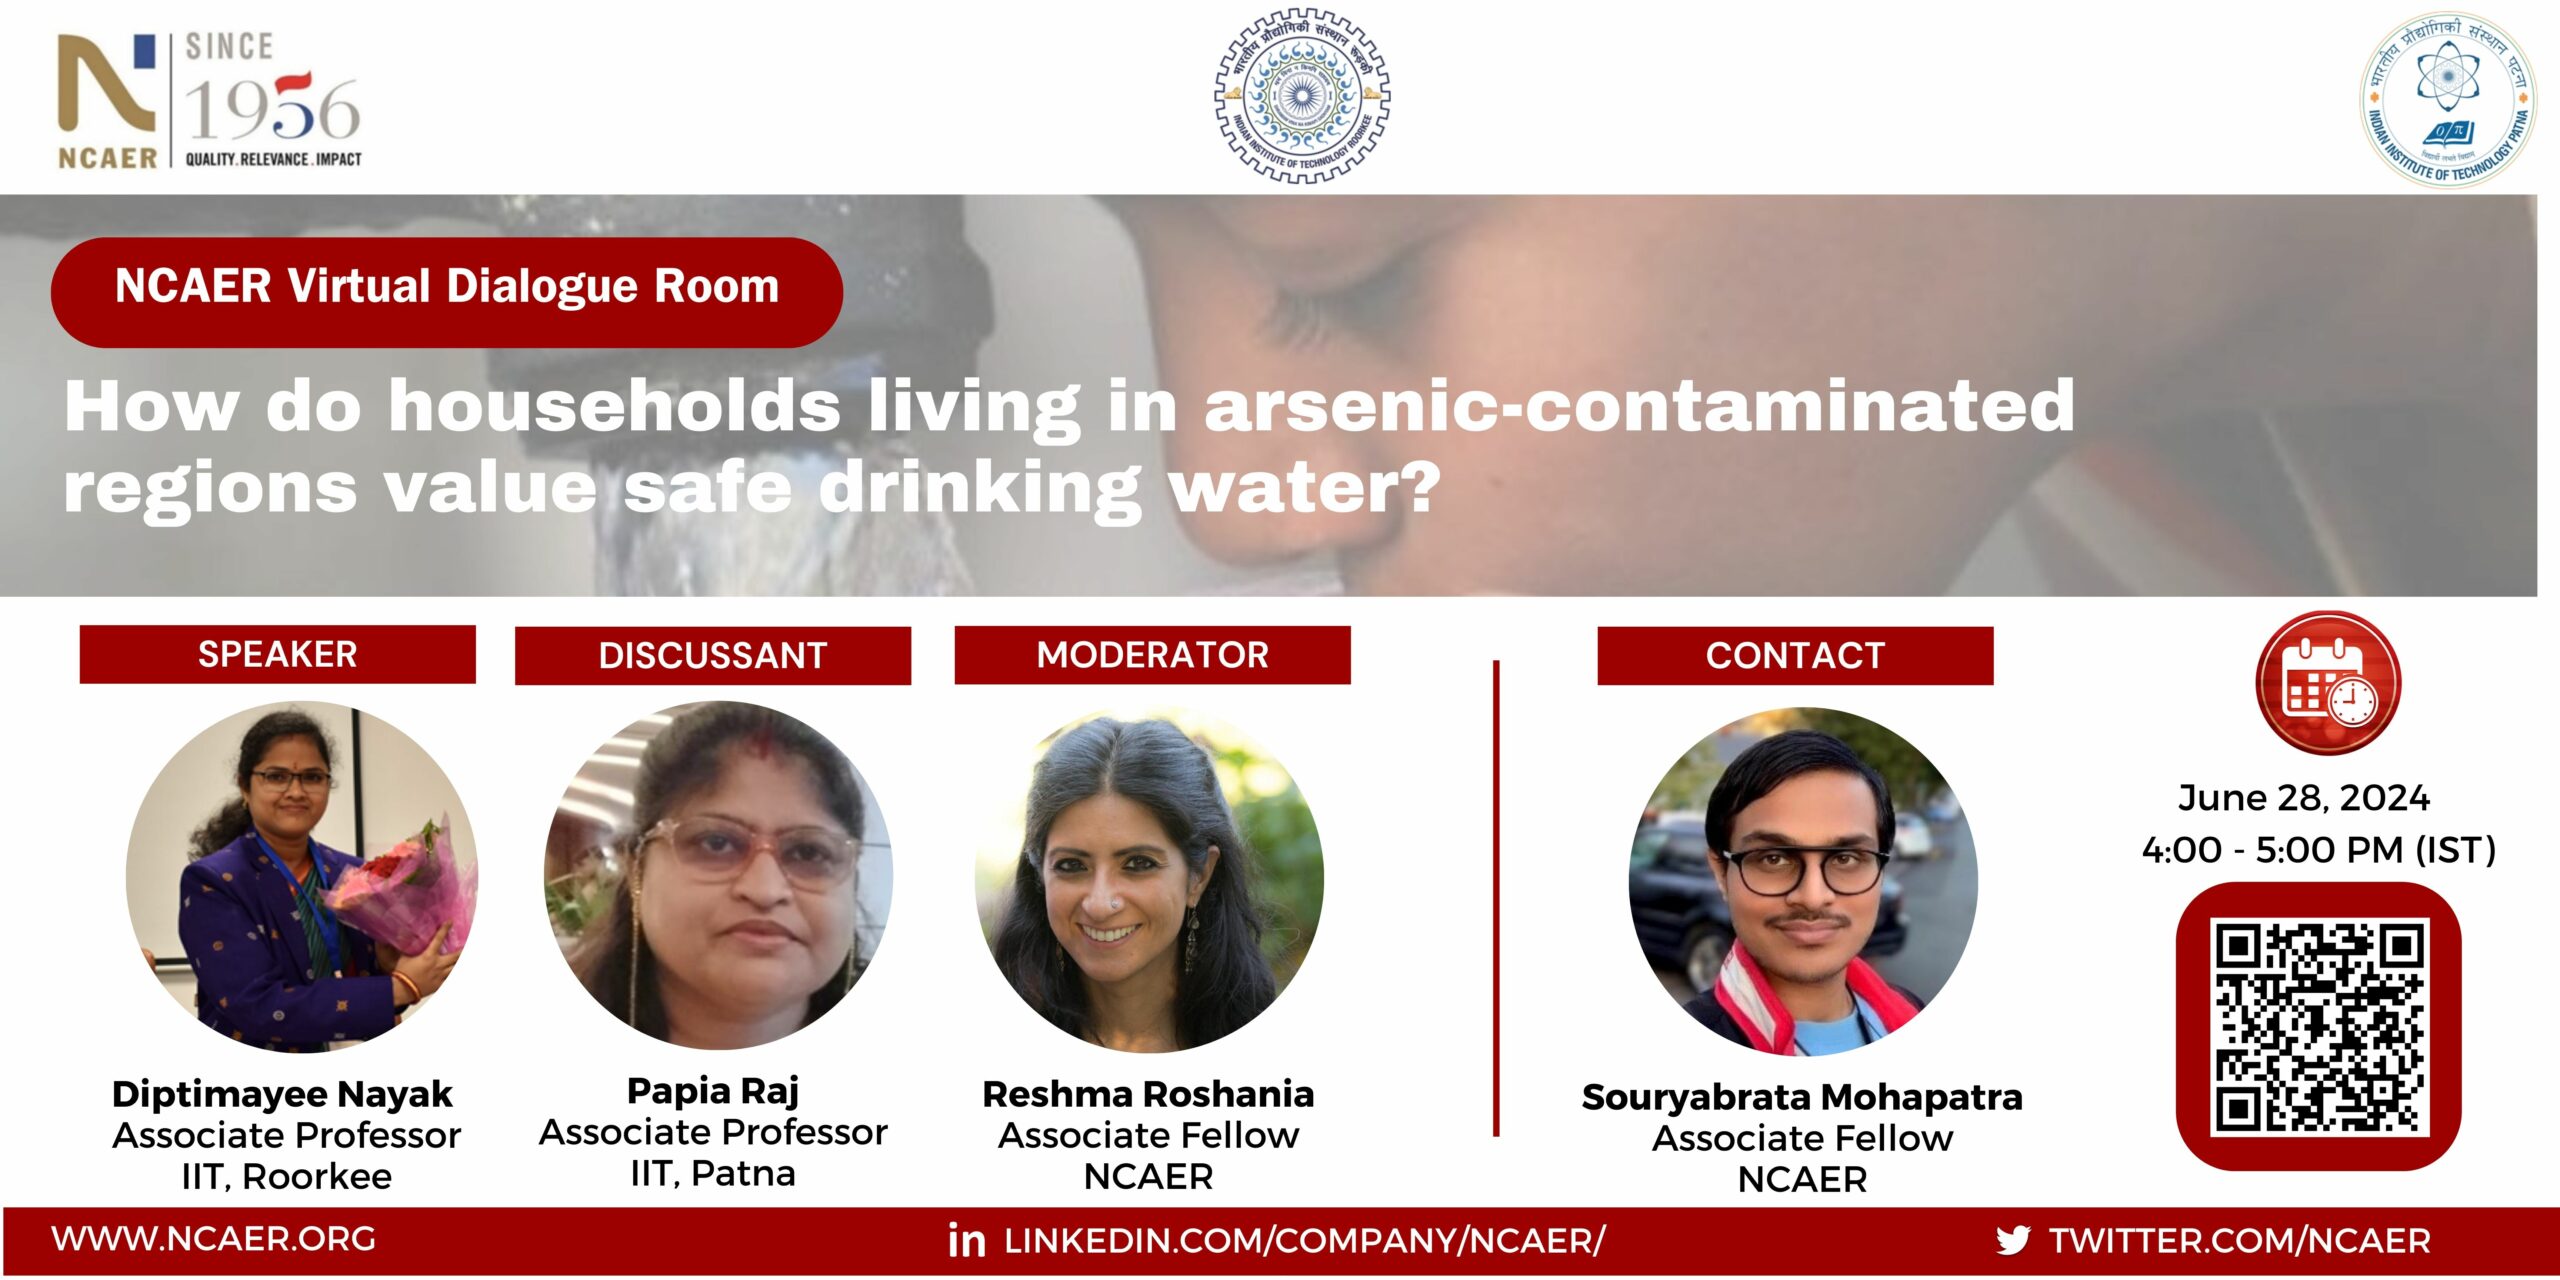 How do households living in arsenic-contaminated regions value safe drinking water?